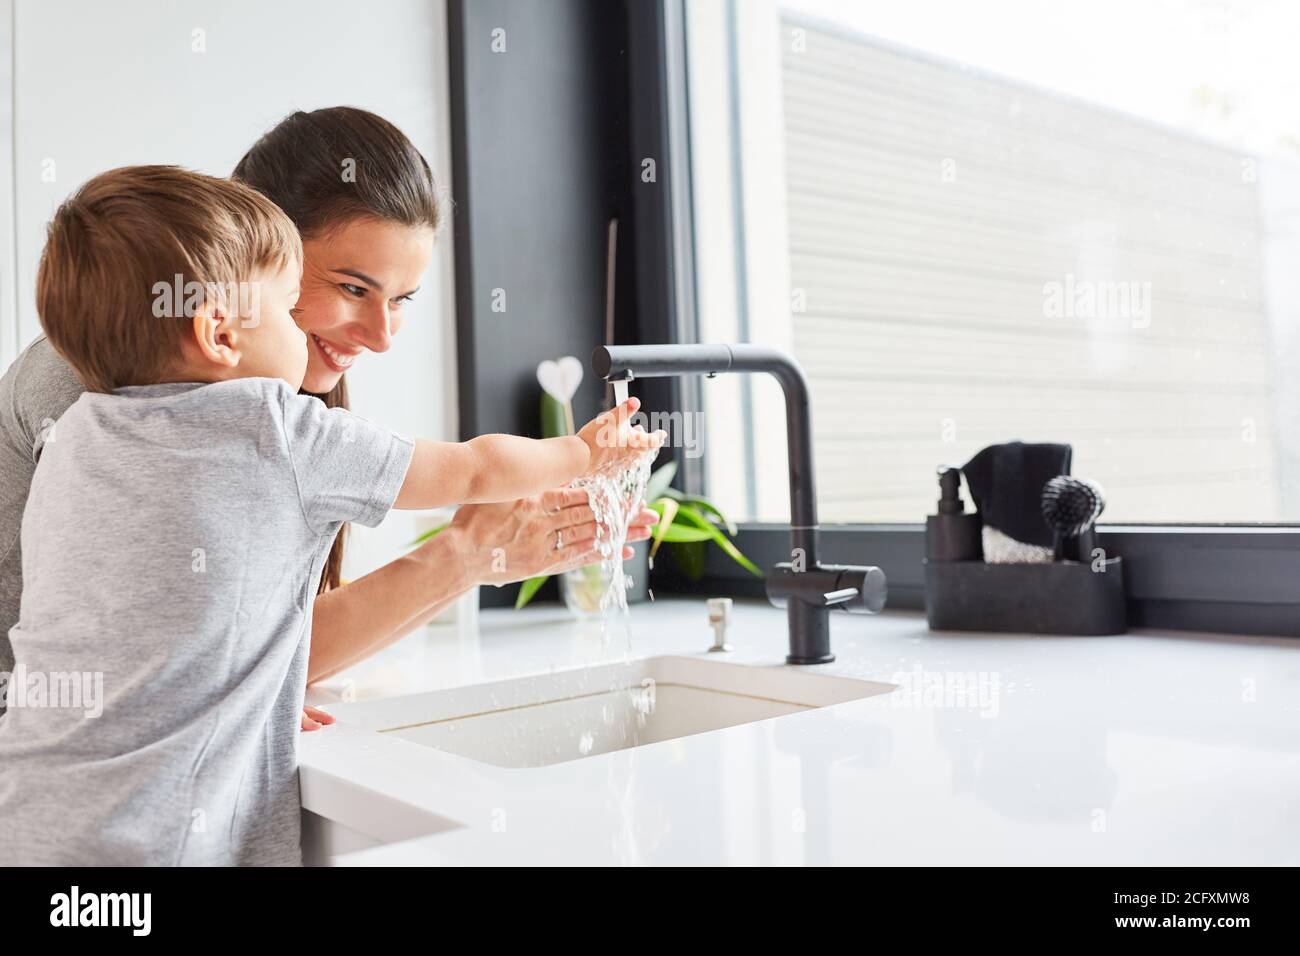 Mother helps child wash hands with soap as hygiene against Covid-19 Stock Photo